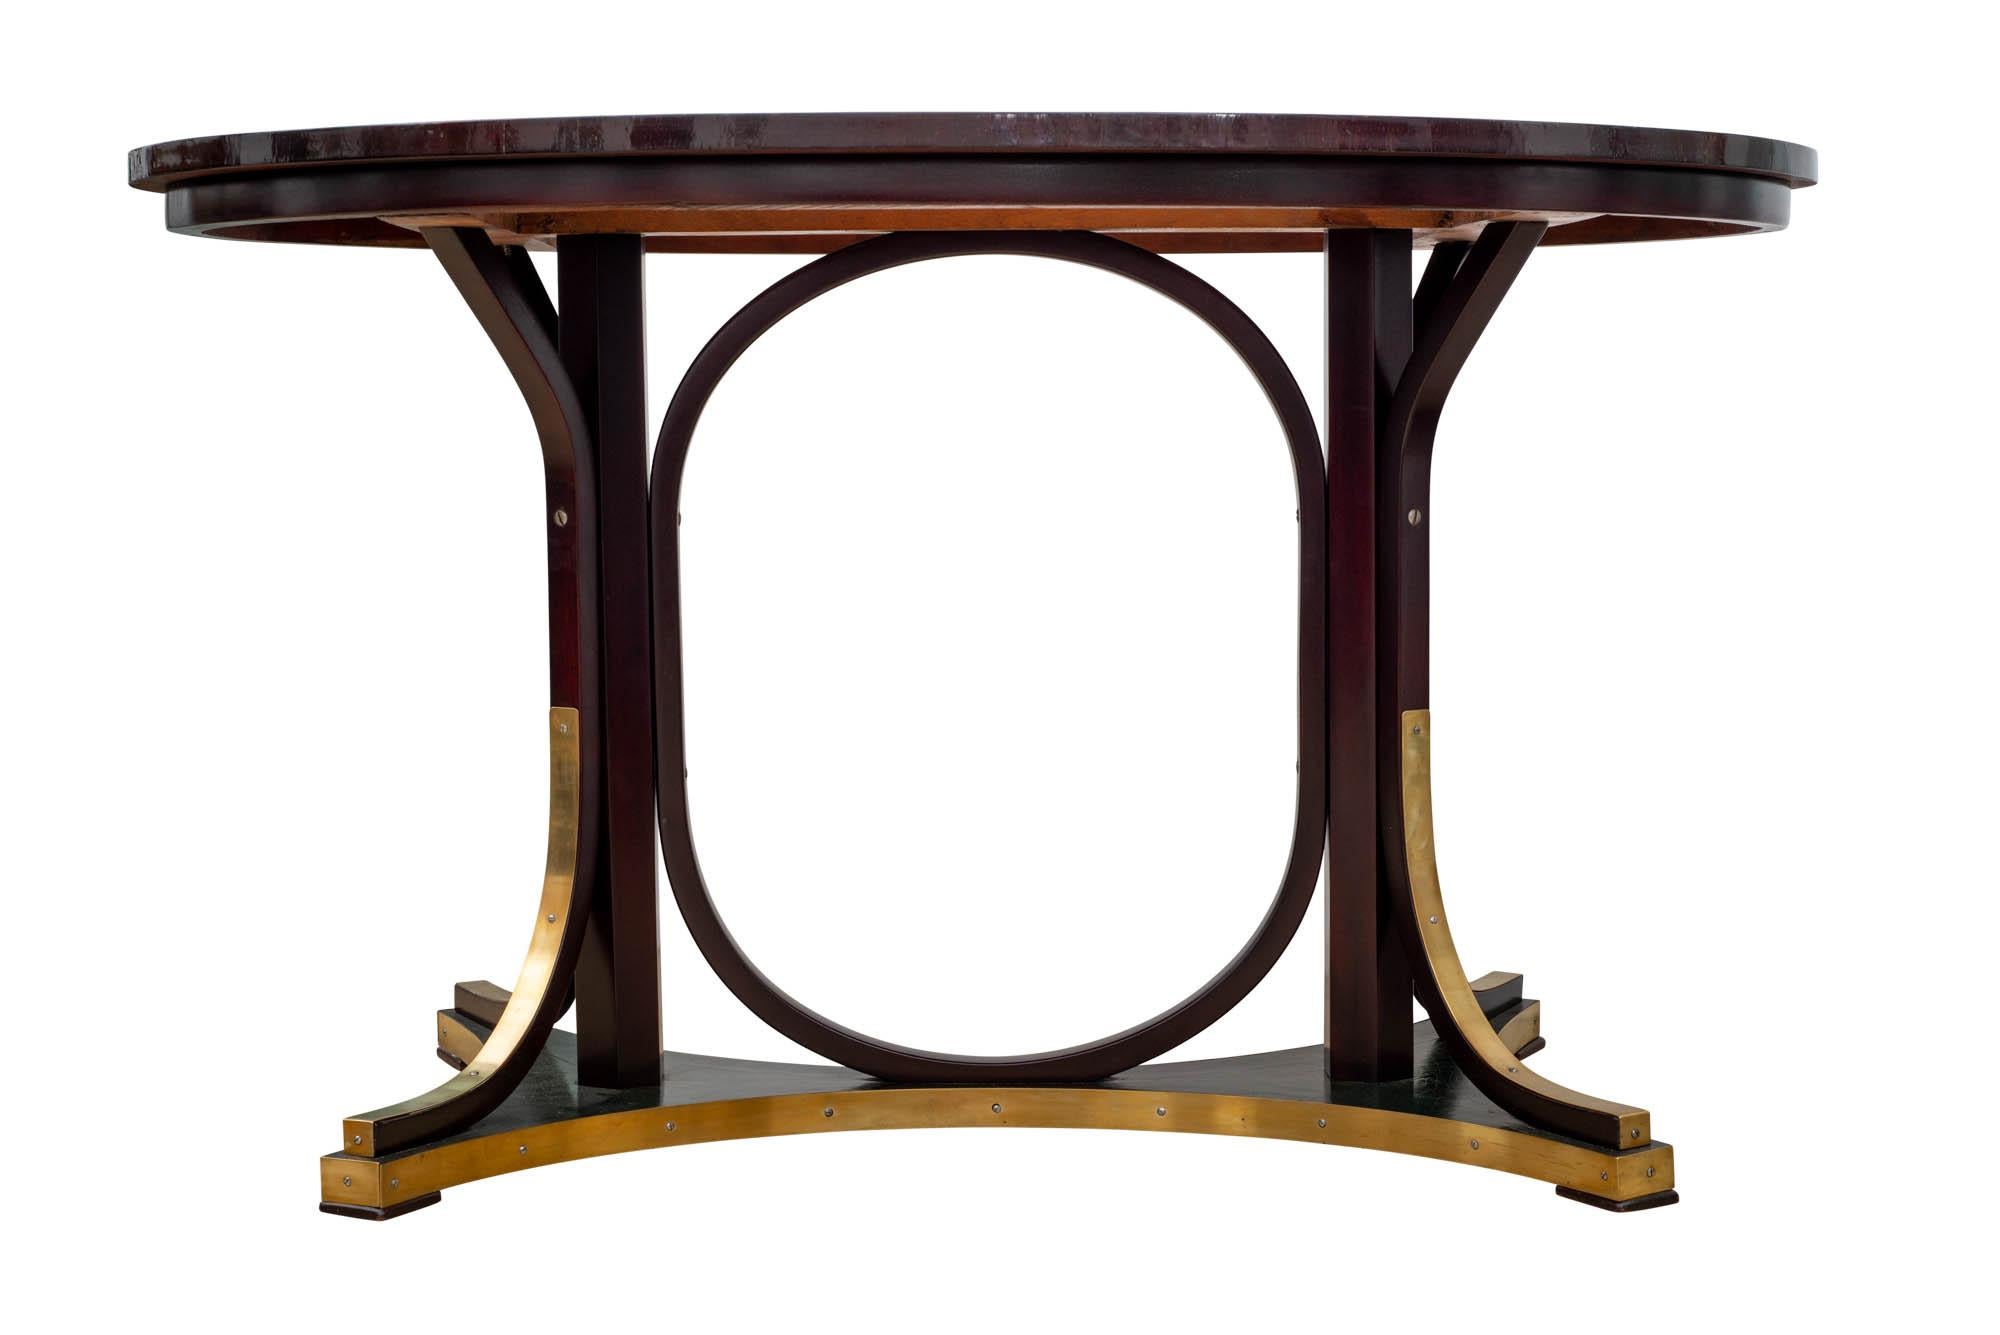 Table Otto Wagner Attribute Thonet Model 8051, circa 1904 In Good Condition For Sale In Vienna, AT